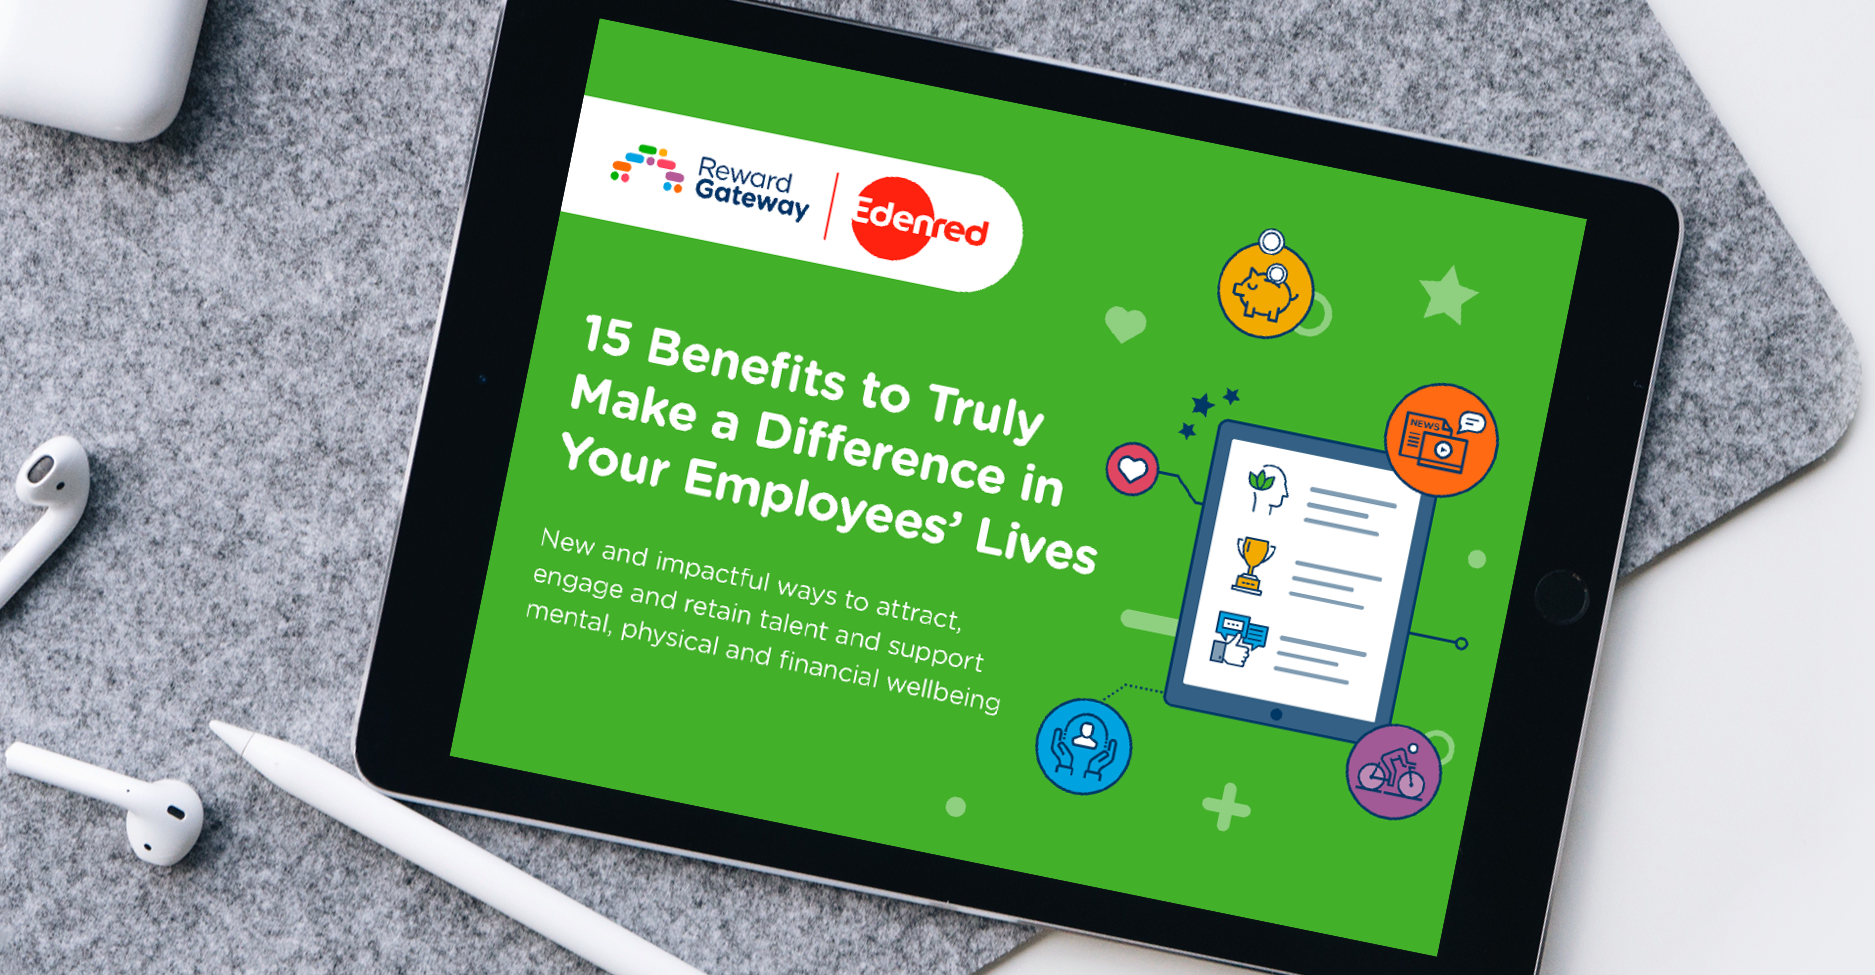 Download the latest eBook from Reward Gateway to discover 15 of the most impactful benefits to offer your employees and make a difference in their daily lives